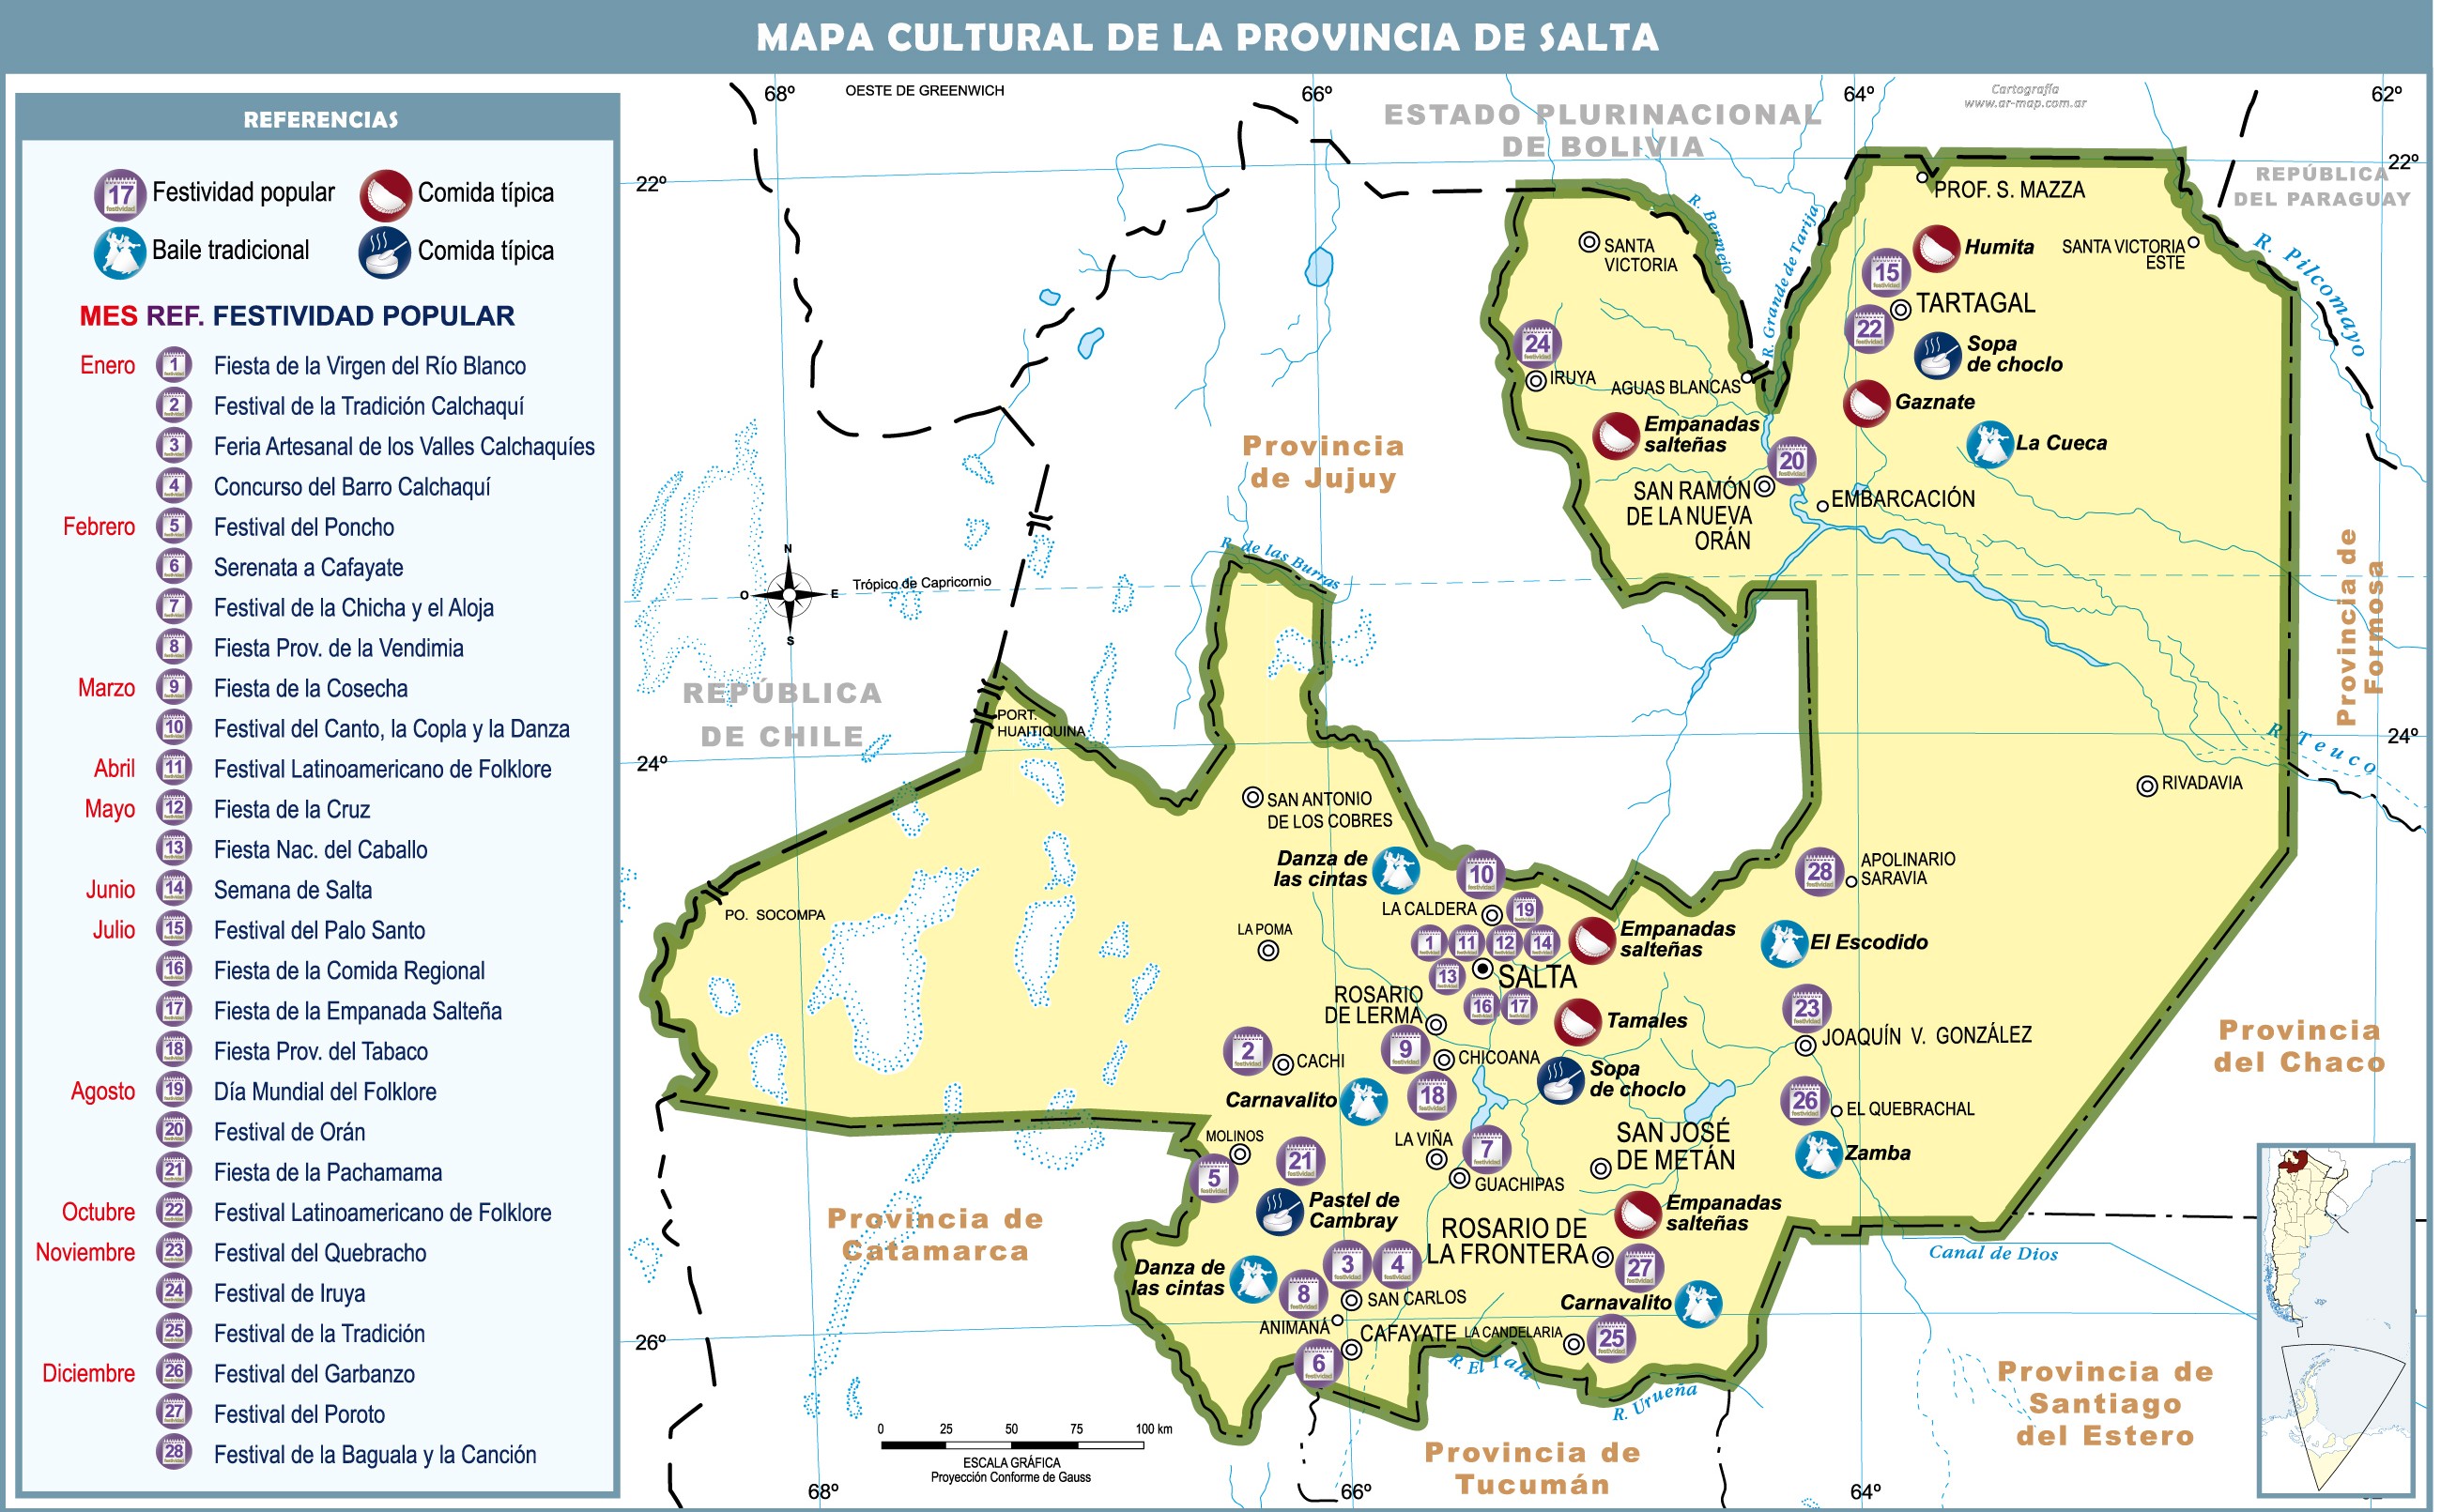 Cultural Map Of The Province Of Salta Ex